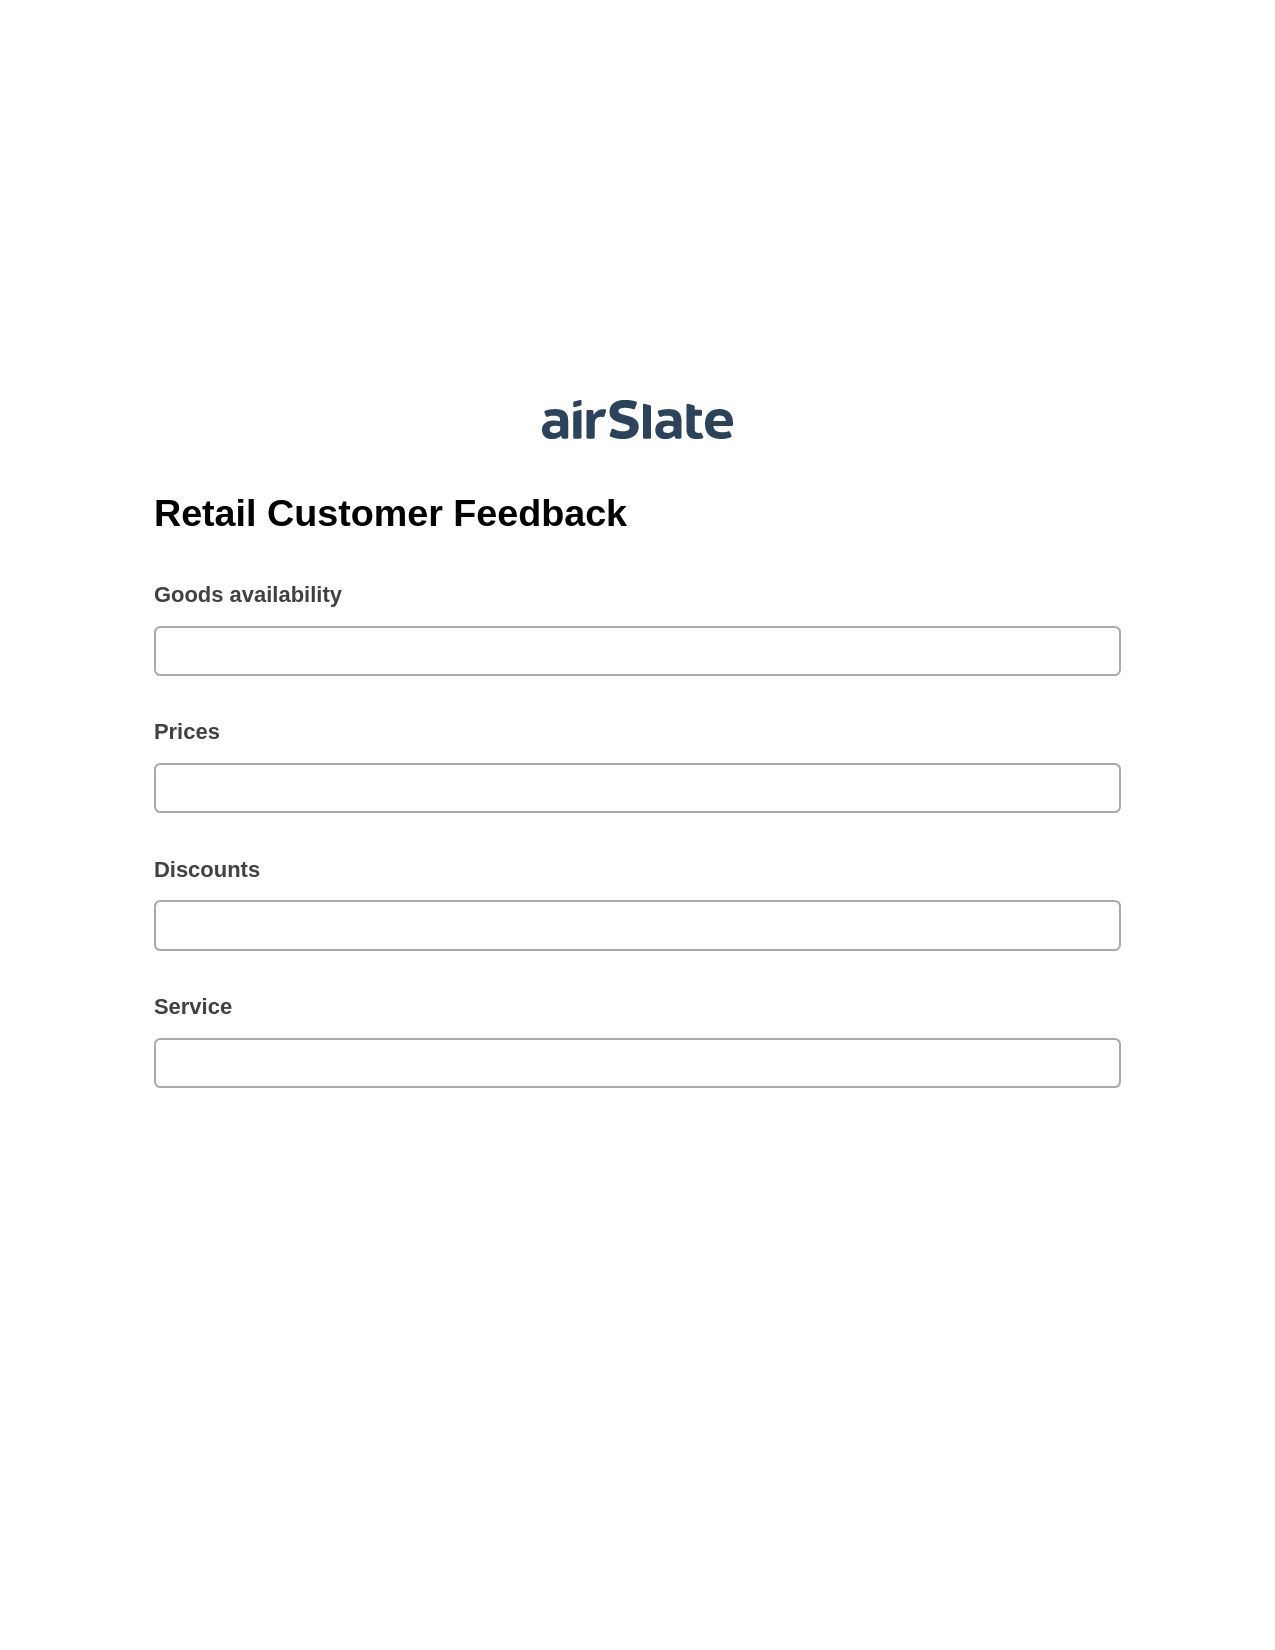 Multirole Retail Customer Feedback Pre-fill Slate from MS Dynamics 365 Records Bot, Send Mailchimp Campaign Bot, Email Notification Postfinish Bot